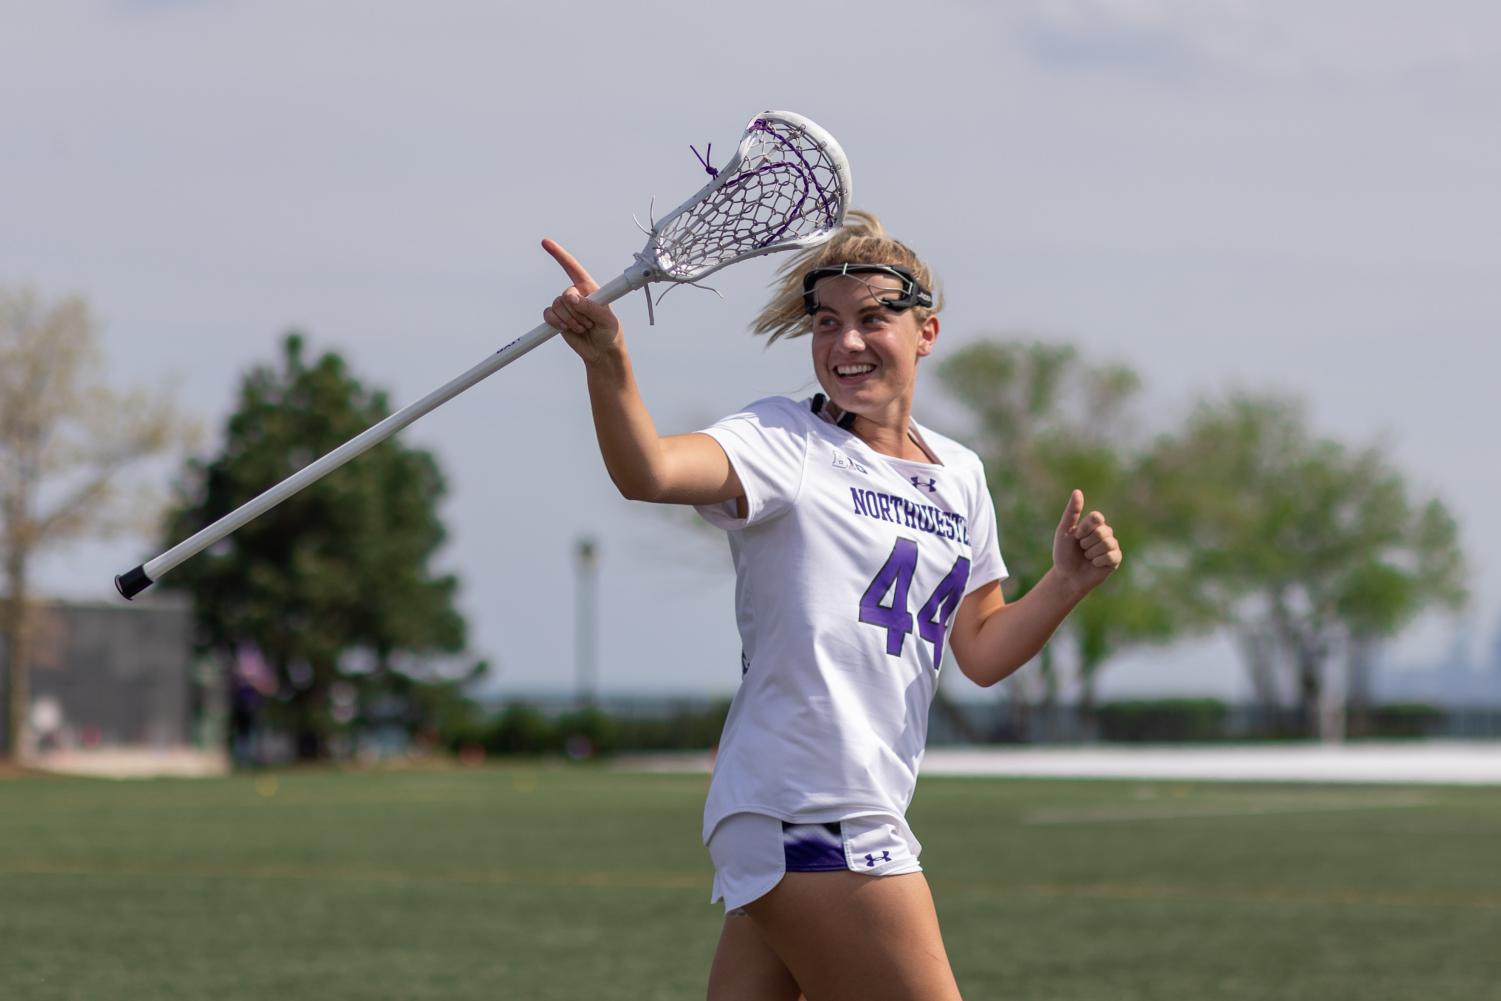 A player in a white jersey holding a lacrosse stick runs and points at their teammates.